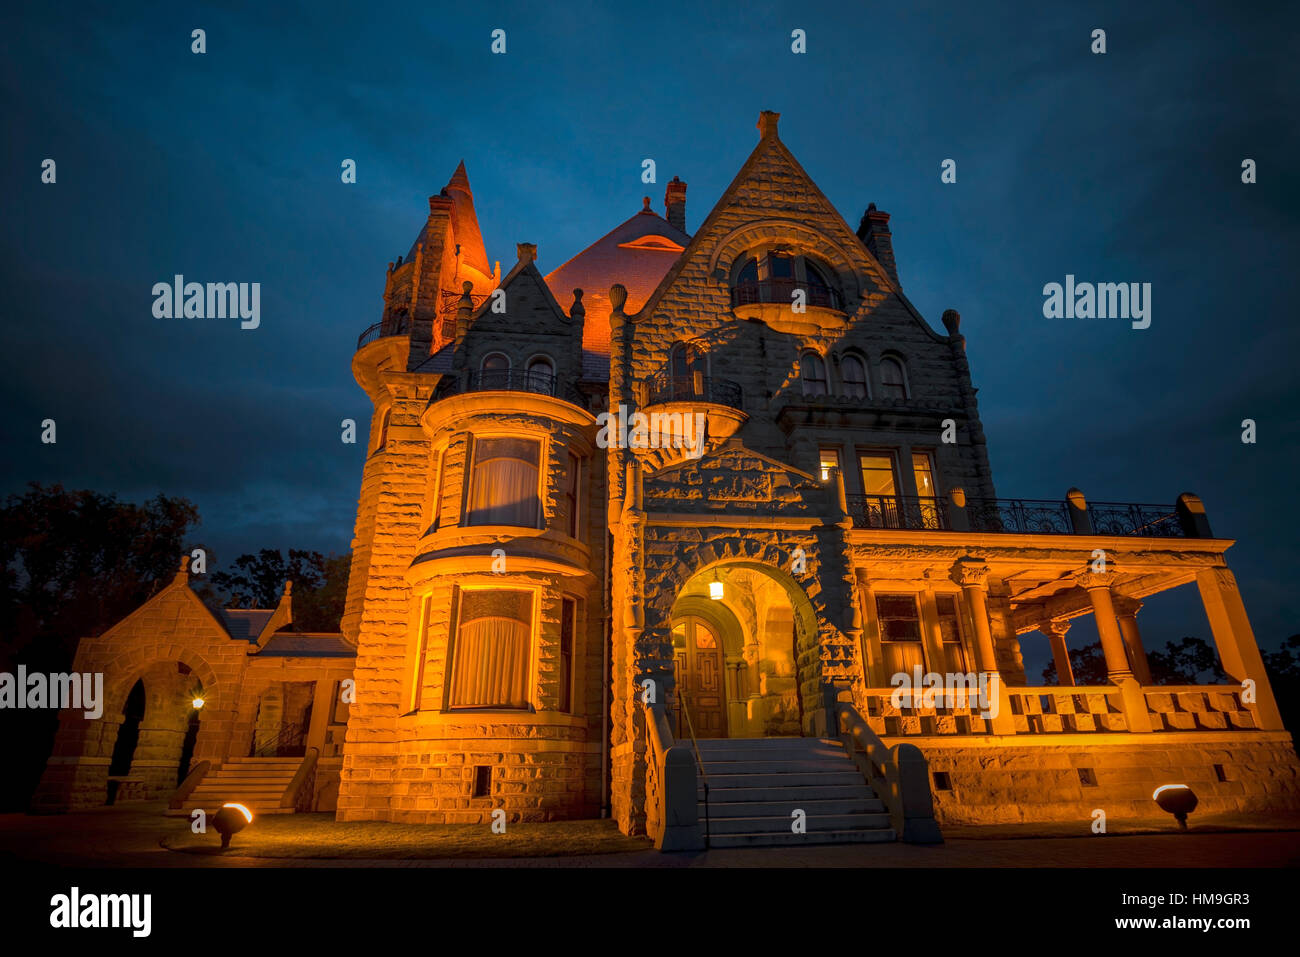 Canada National Historic Building in Vancouver Island -  Night of craigdarroch castle 2. Stock Photo